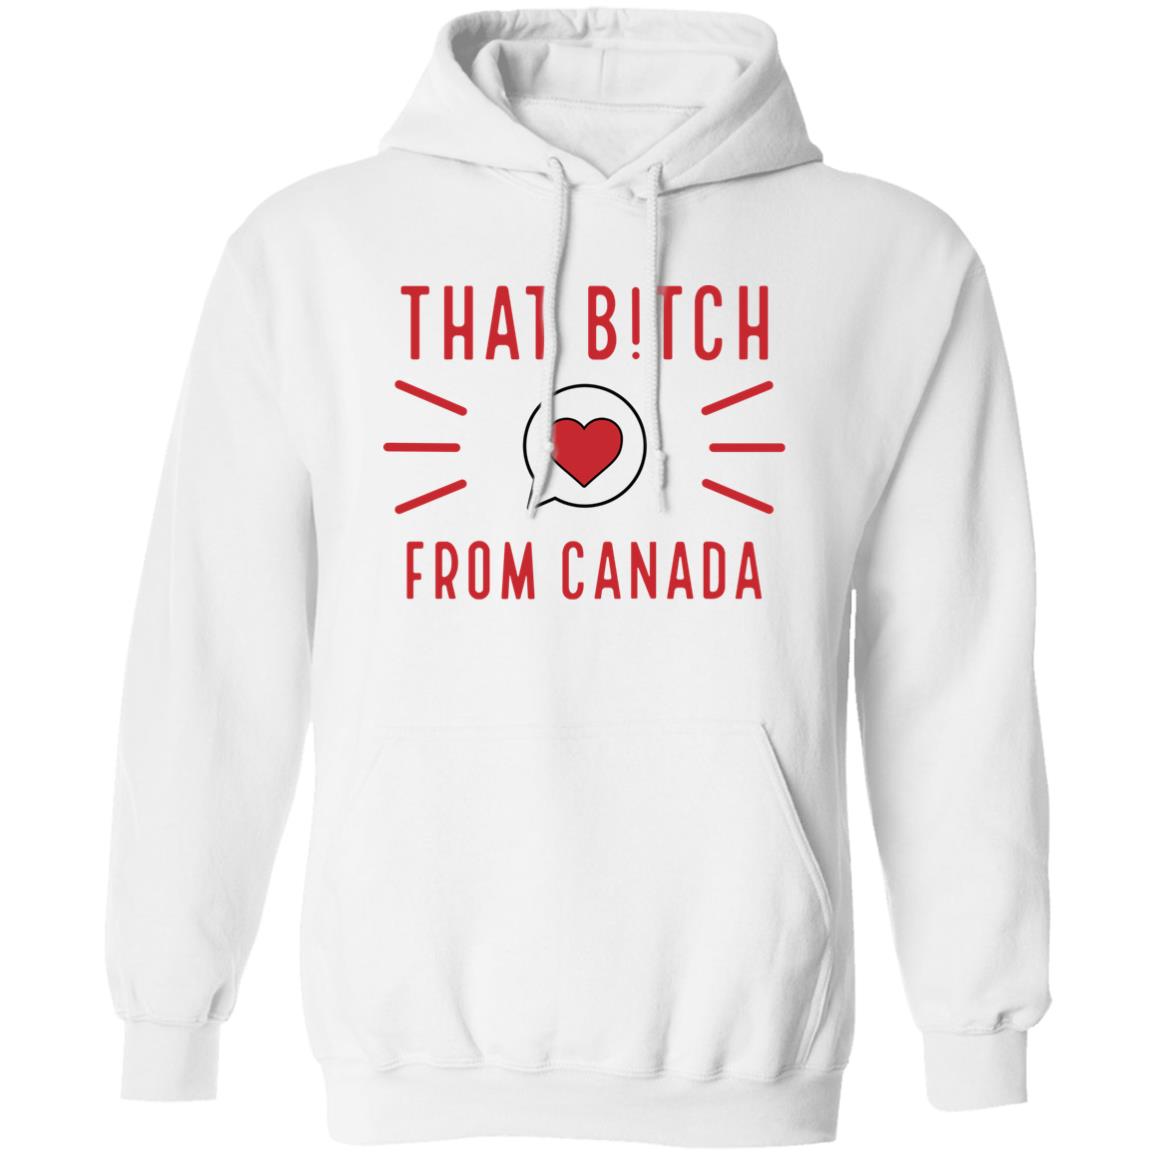 That Bitch From Canada Shirt 1